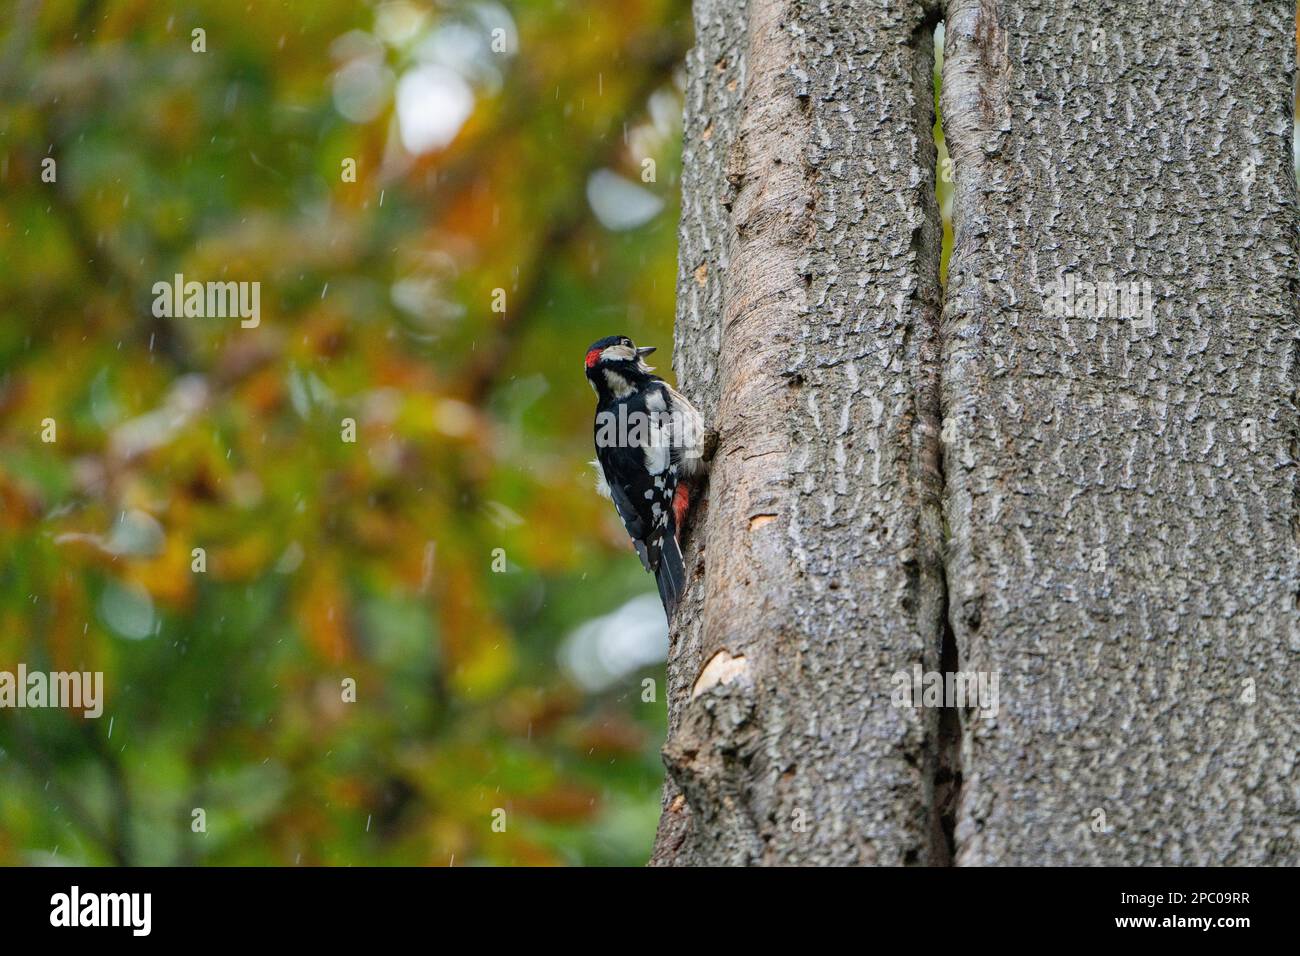 Great Spotted Woodpecker, The woodpecker often symbolizes the new opportunities that come knocking into our lives. Stock Photo